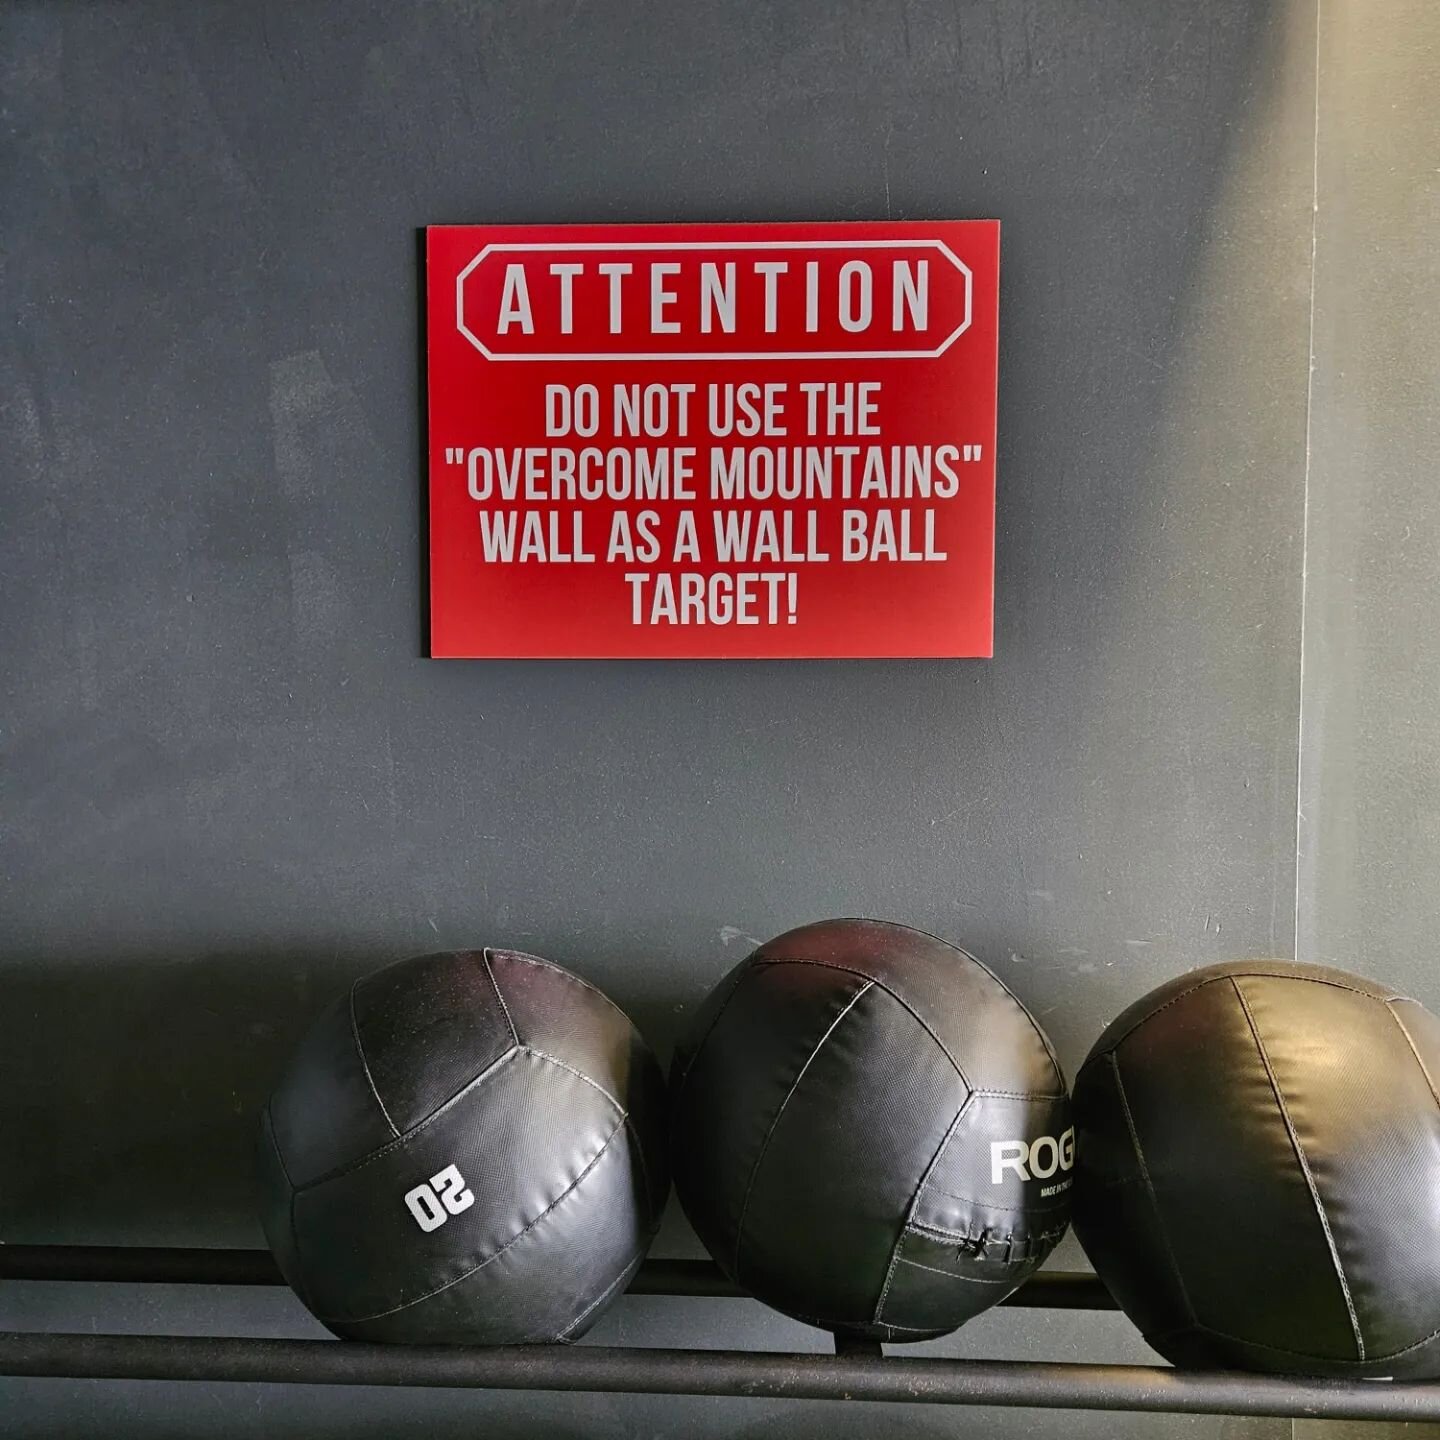 Members, please note signage around the gym. 

Our mural wall is made of drywall and cannot handle any impact.  It also shakes the neighbouring wall that undermines the mirrors and tv systems on the other side.

If you wish to do wall balls with high